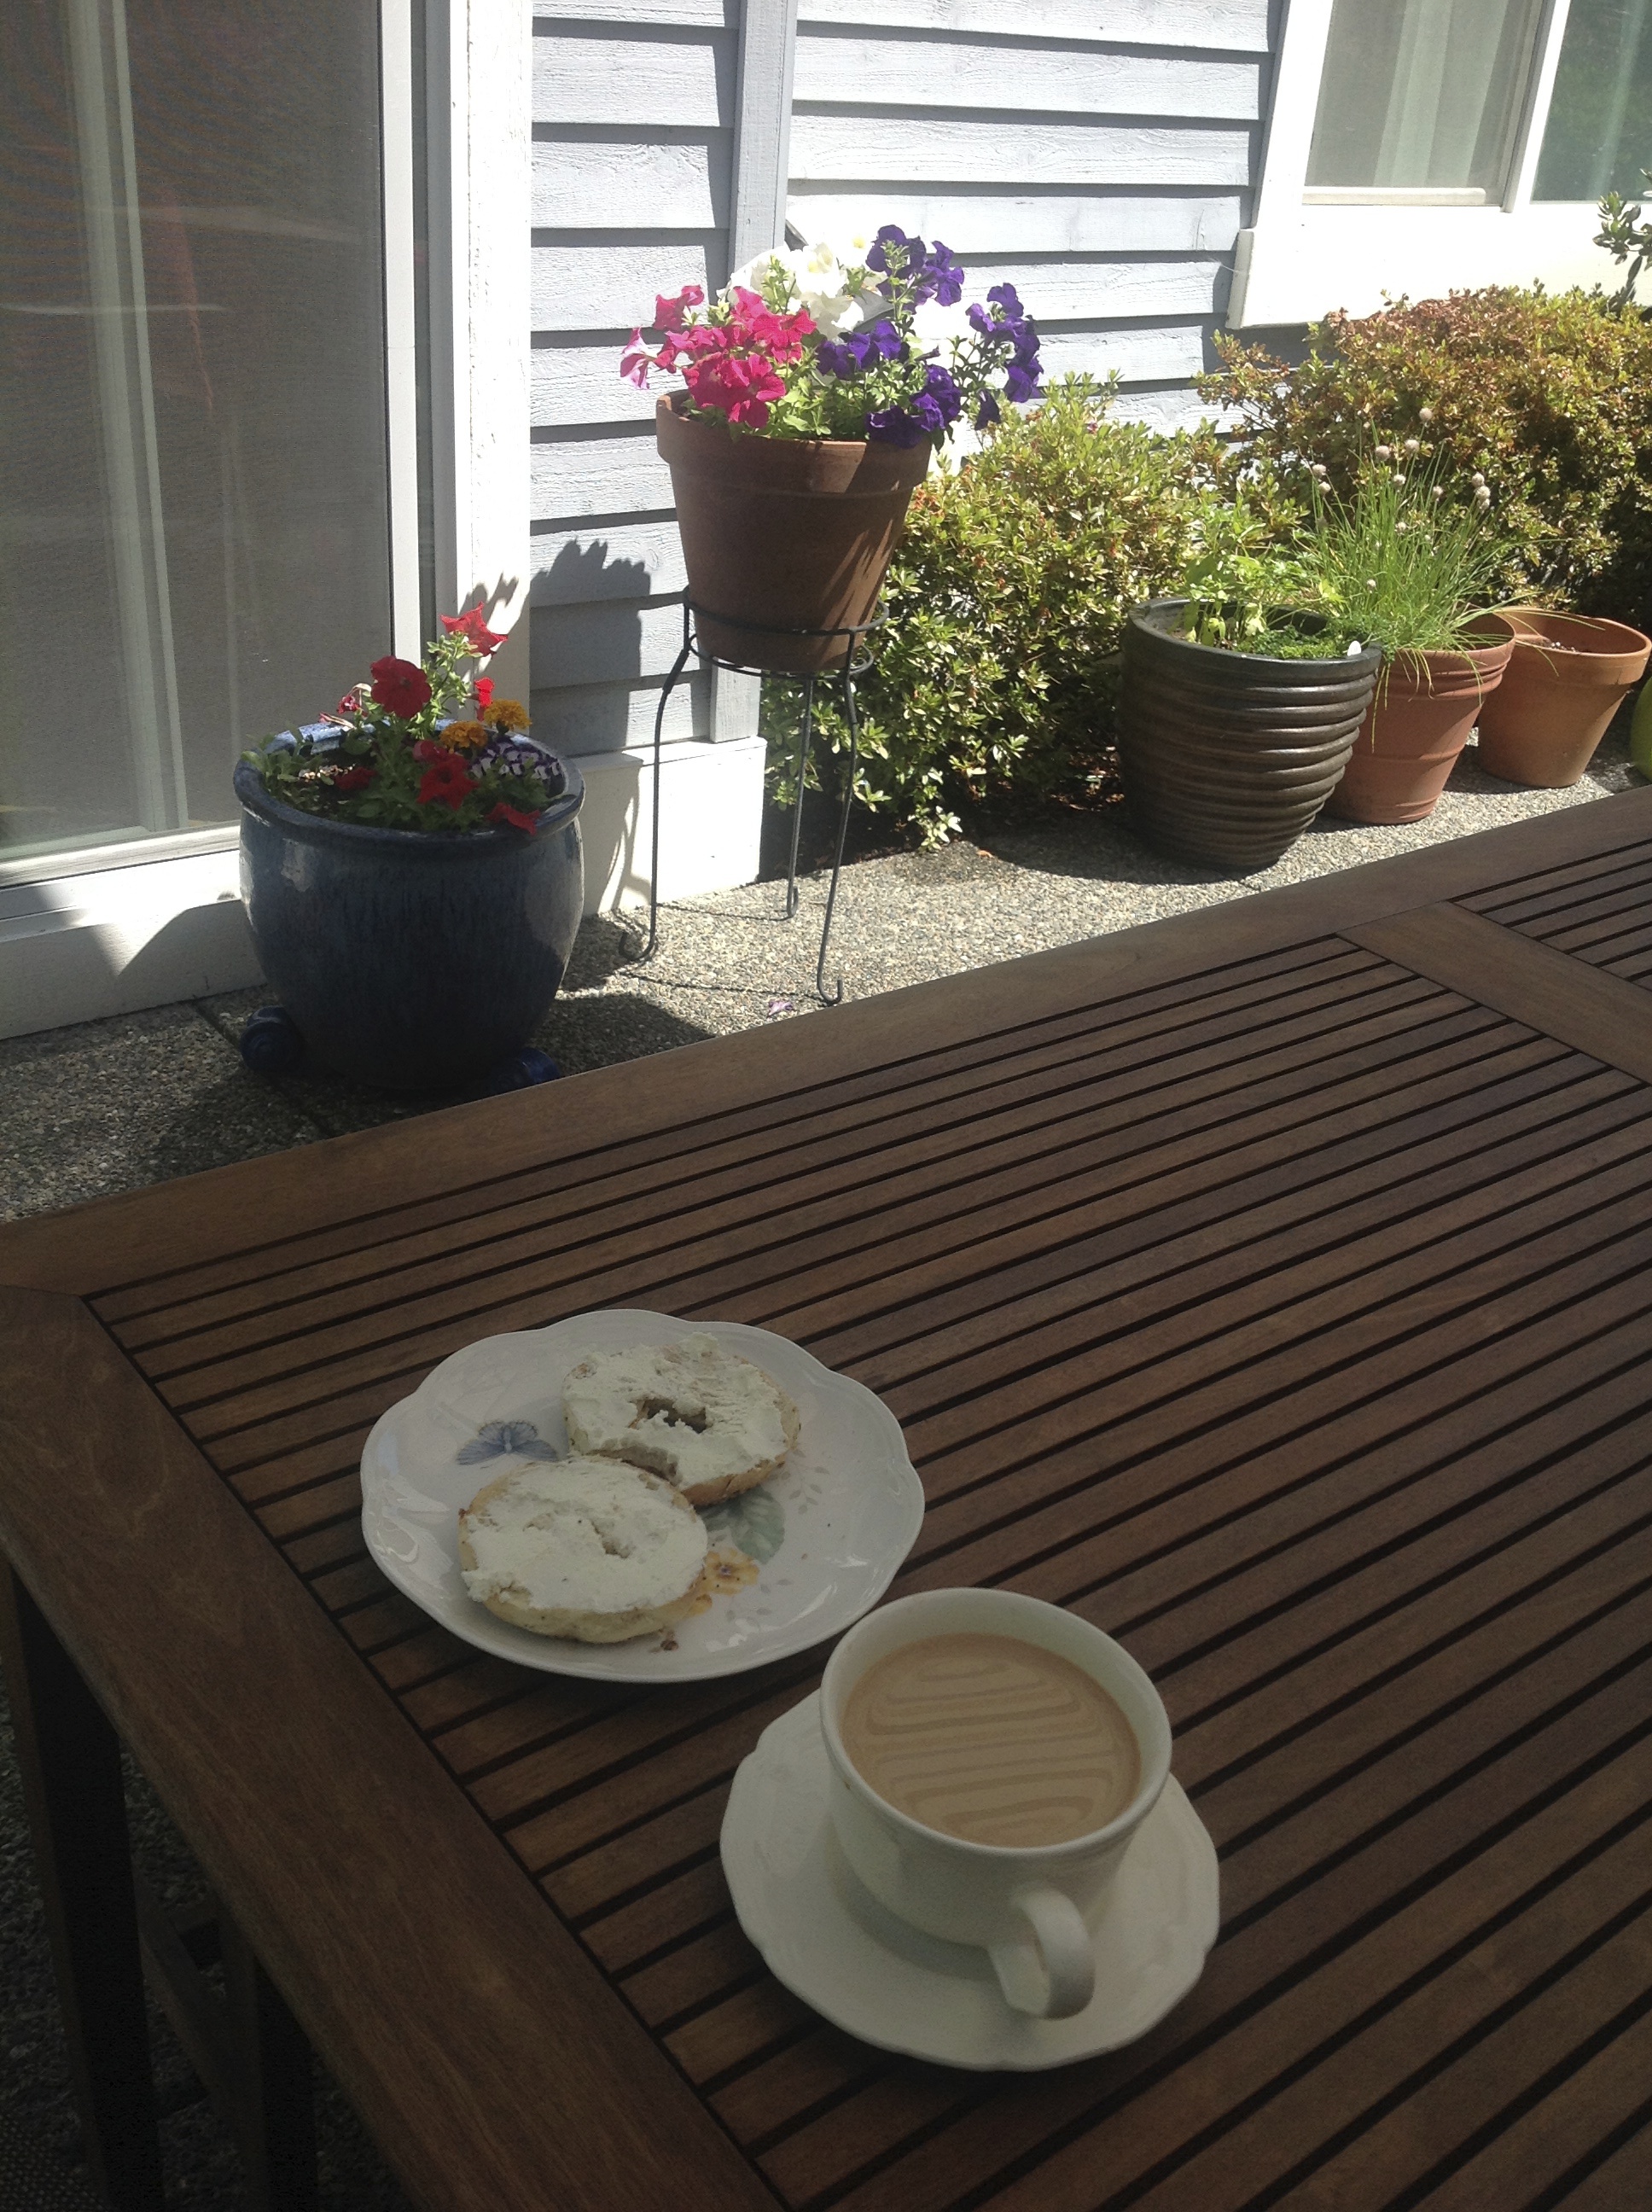 coffee and bagels in the garden!